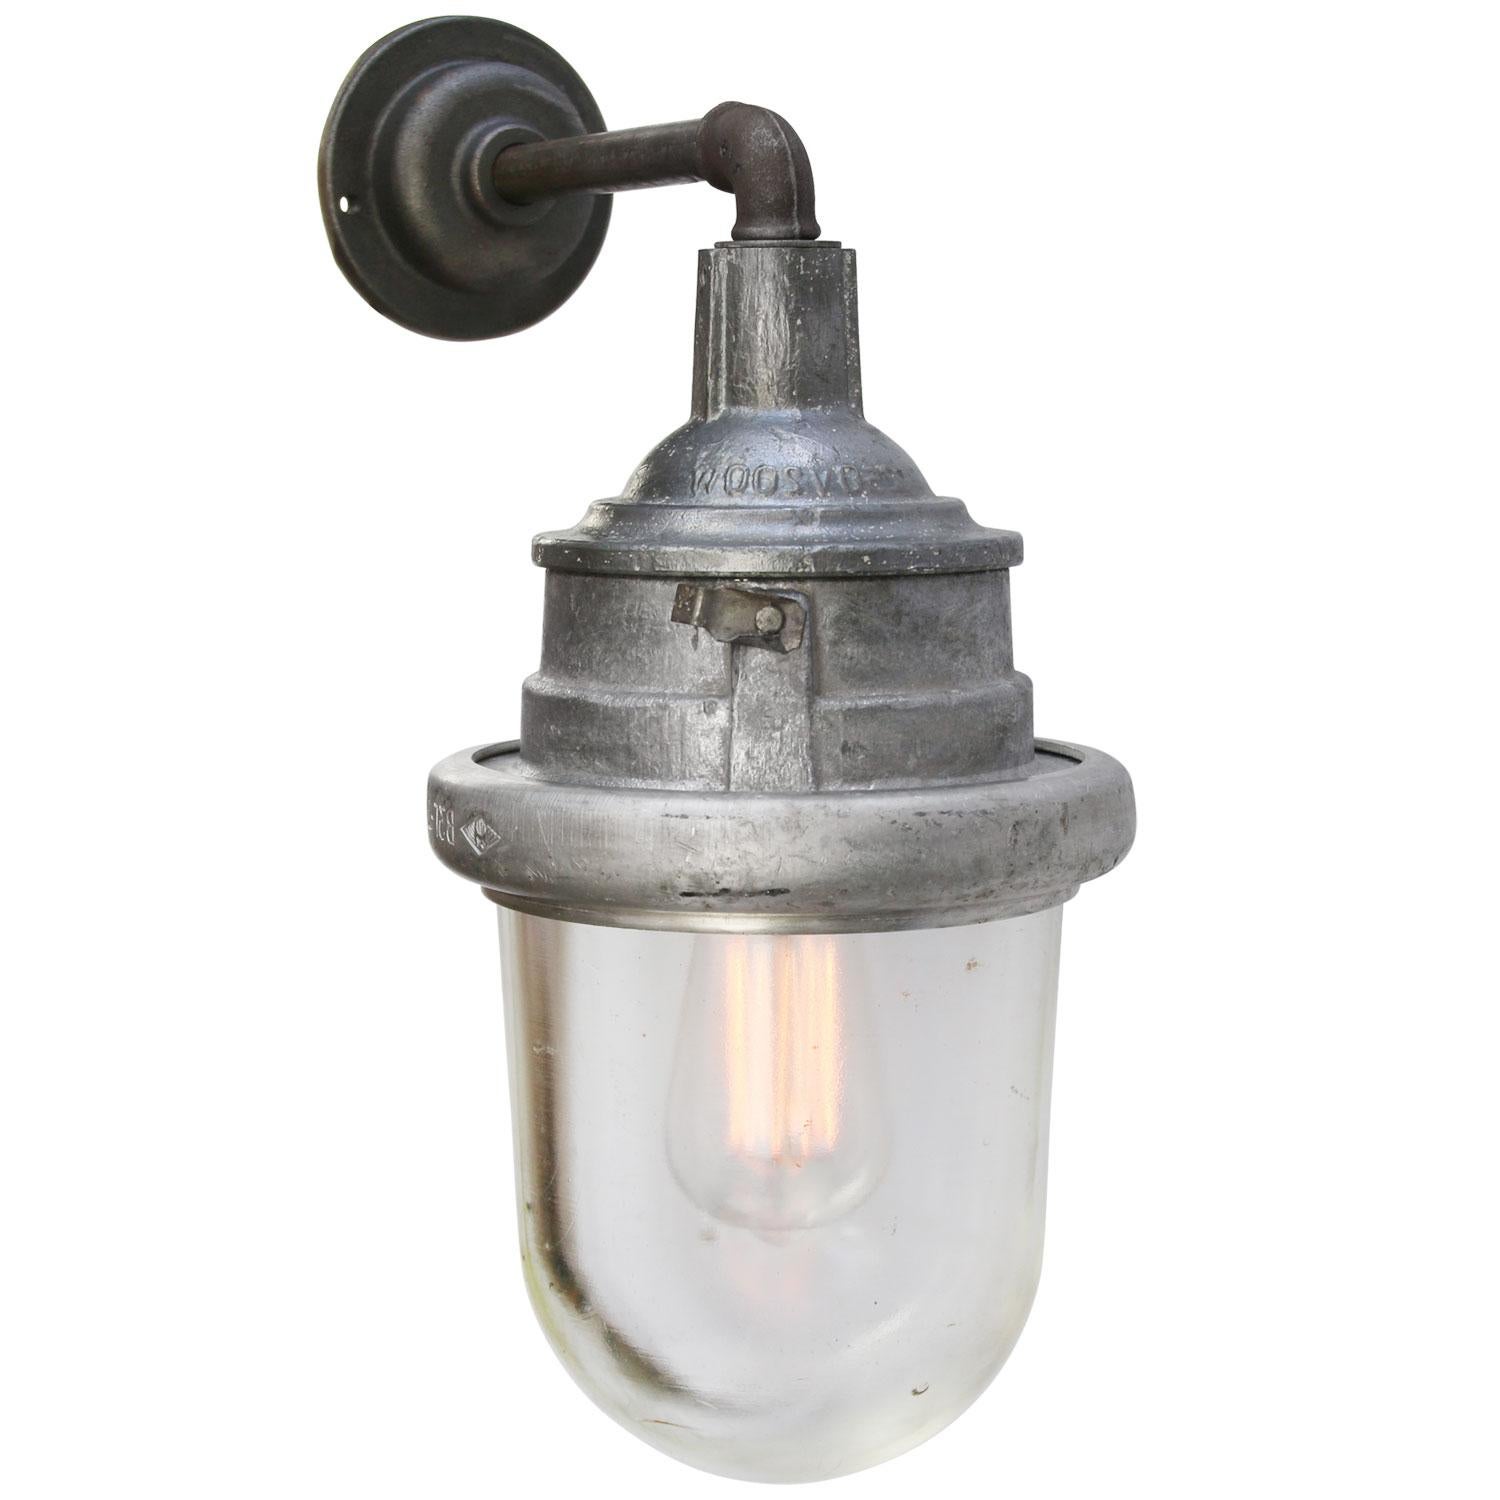 Cast iron and aluminium industrial wall light
clear glass

diameter cast iron wall piece 10 cm, 2 holes to secure

Weight: 5.50 kg / 12.1 lb

Priced per individual item. All lamps have been made suitable by international standards for